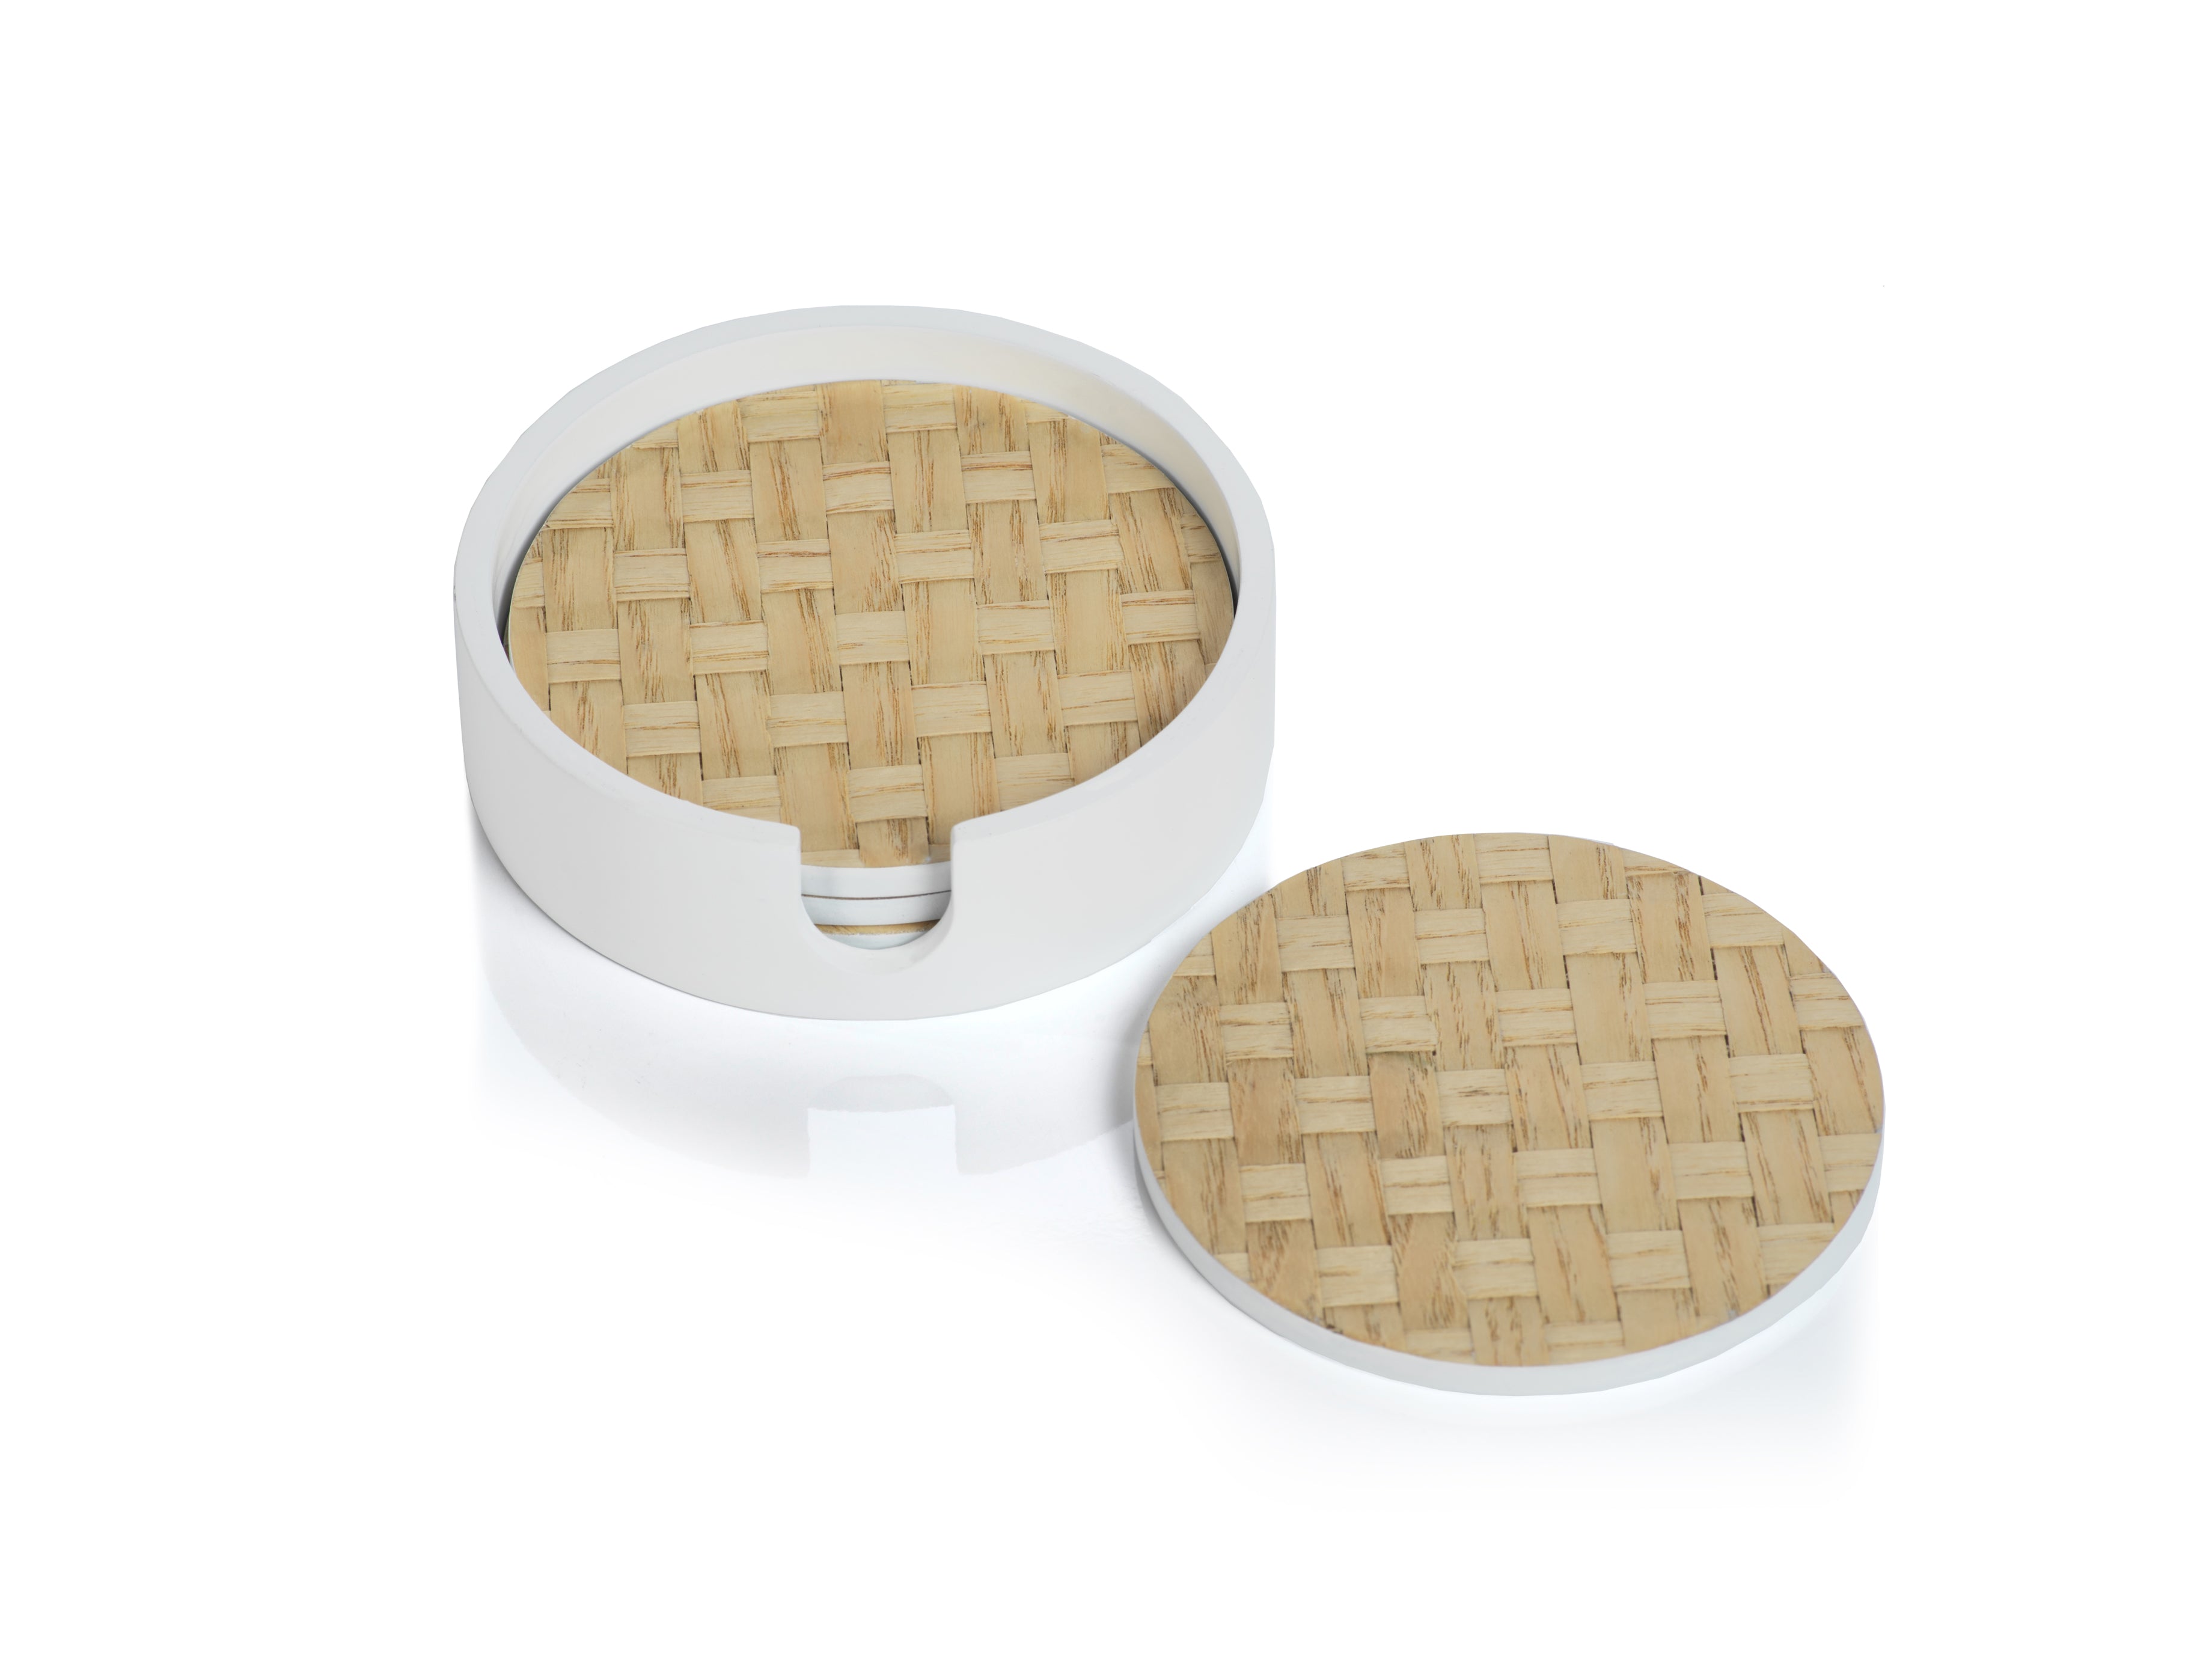 S/4 Woven Ash Coaster in White Tray - CARLYLE AVENUE